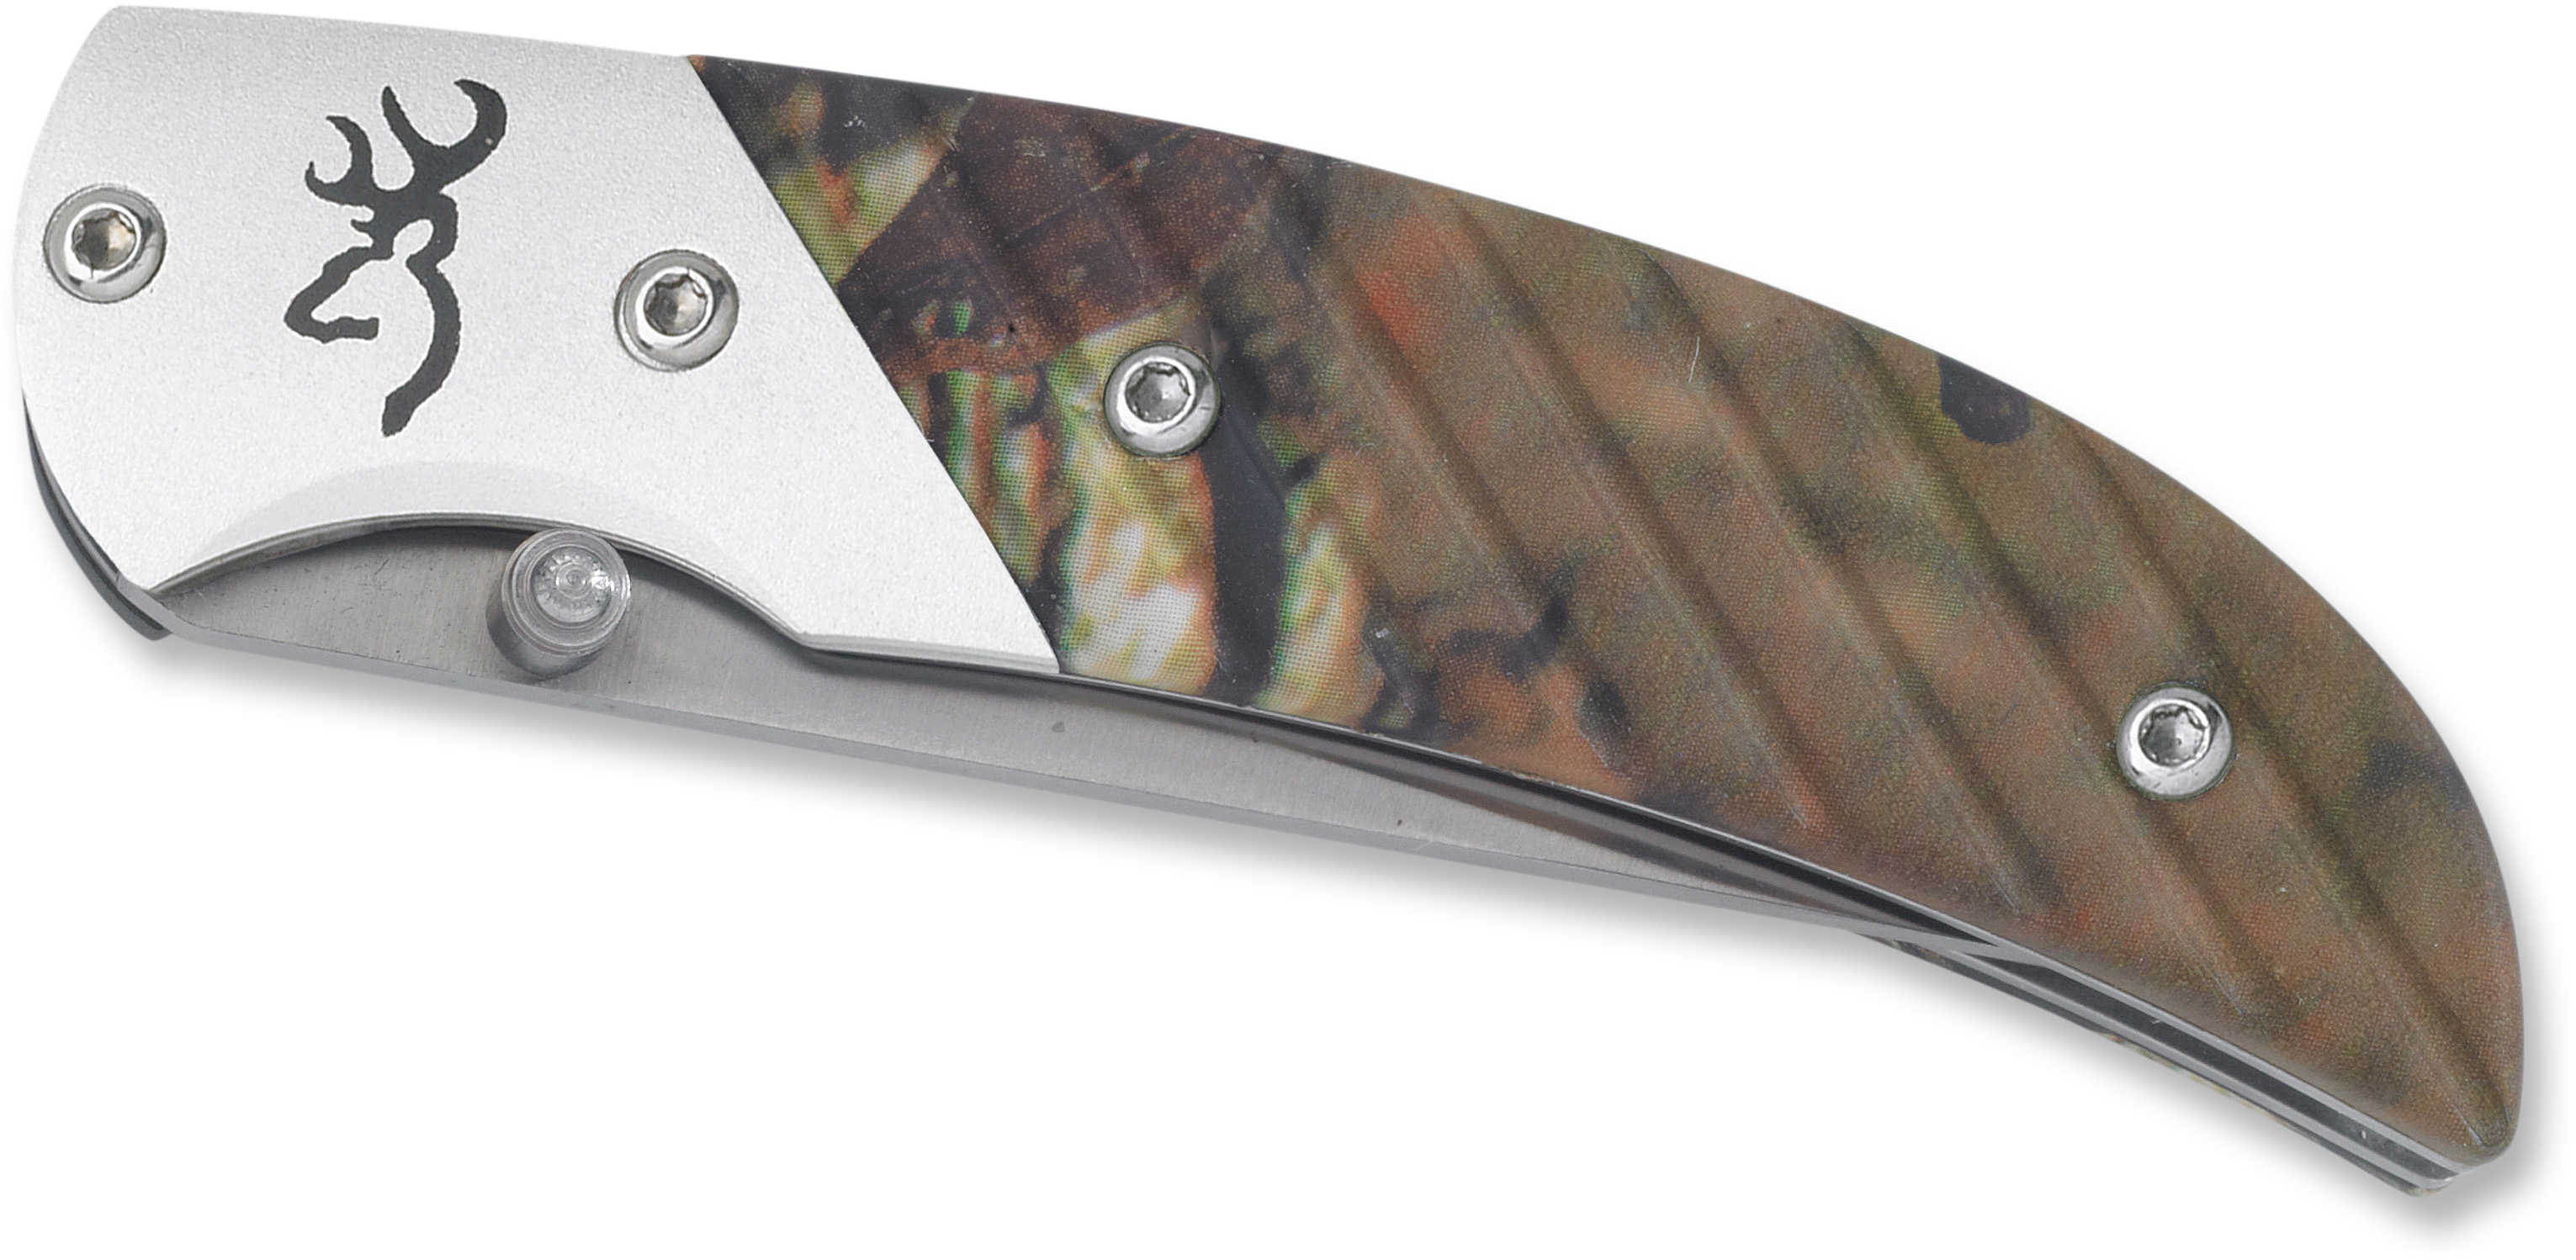 Browning Folding Knife 5672B Prism Ii Moinf Md: 3225672B